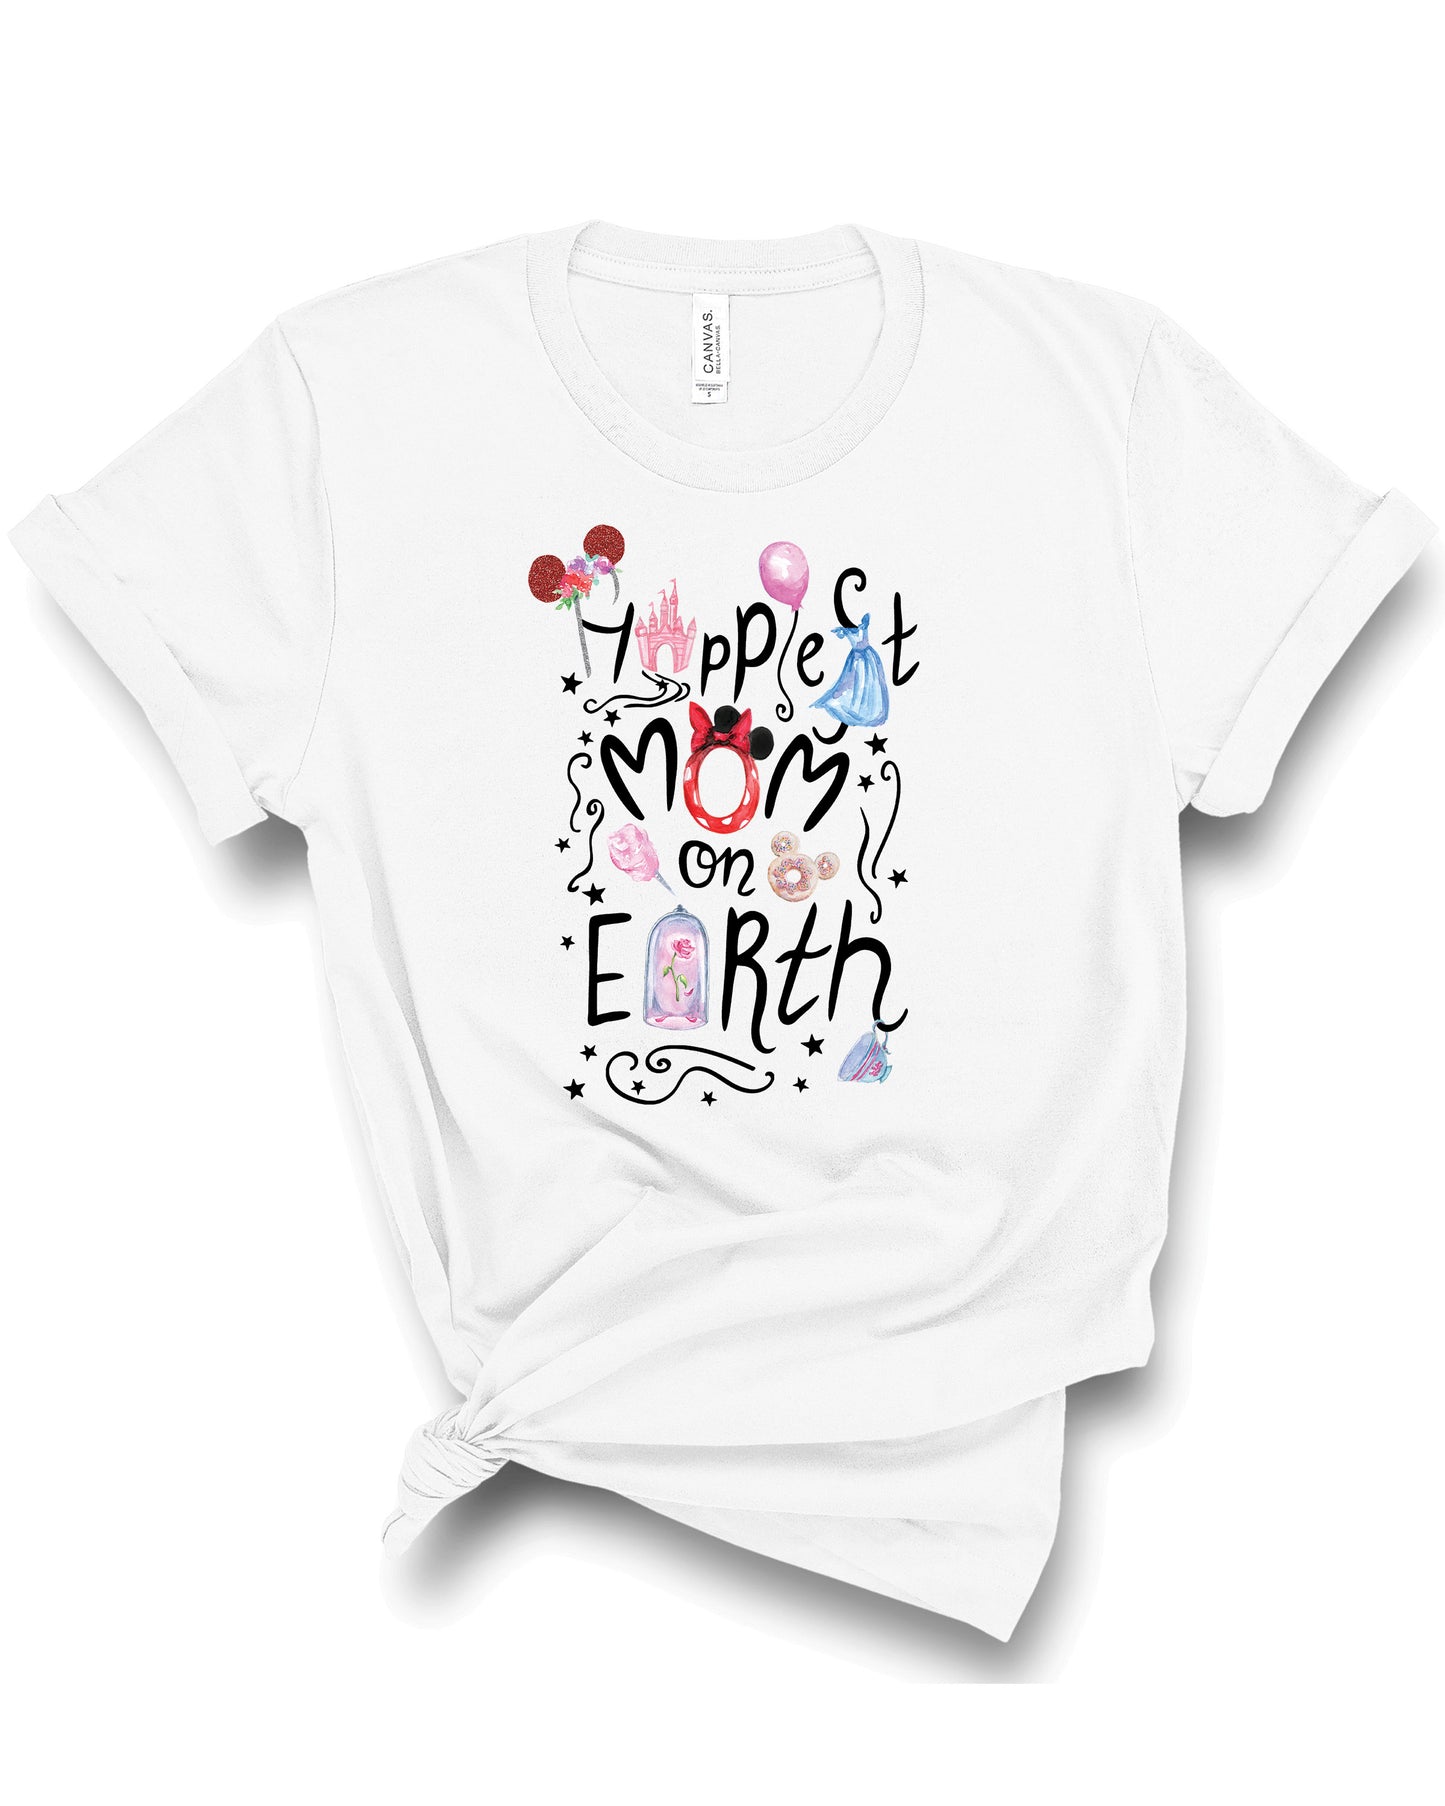 Happiest Mom on Earth | Tee | Adult-Shirt Shop-Sister Shirts, Cute & Custom Tees for Mama & Littles in Trussville, Alabama.